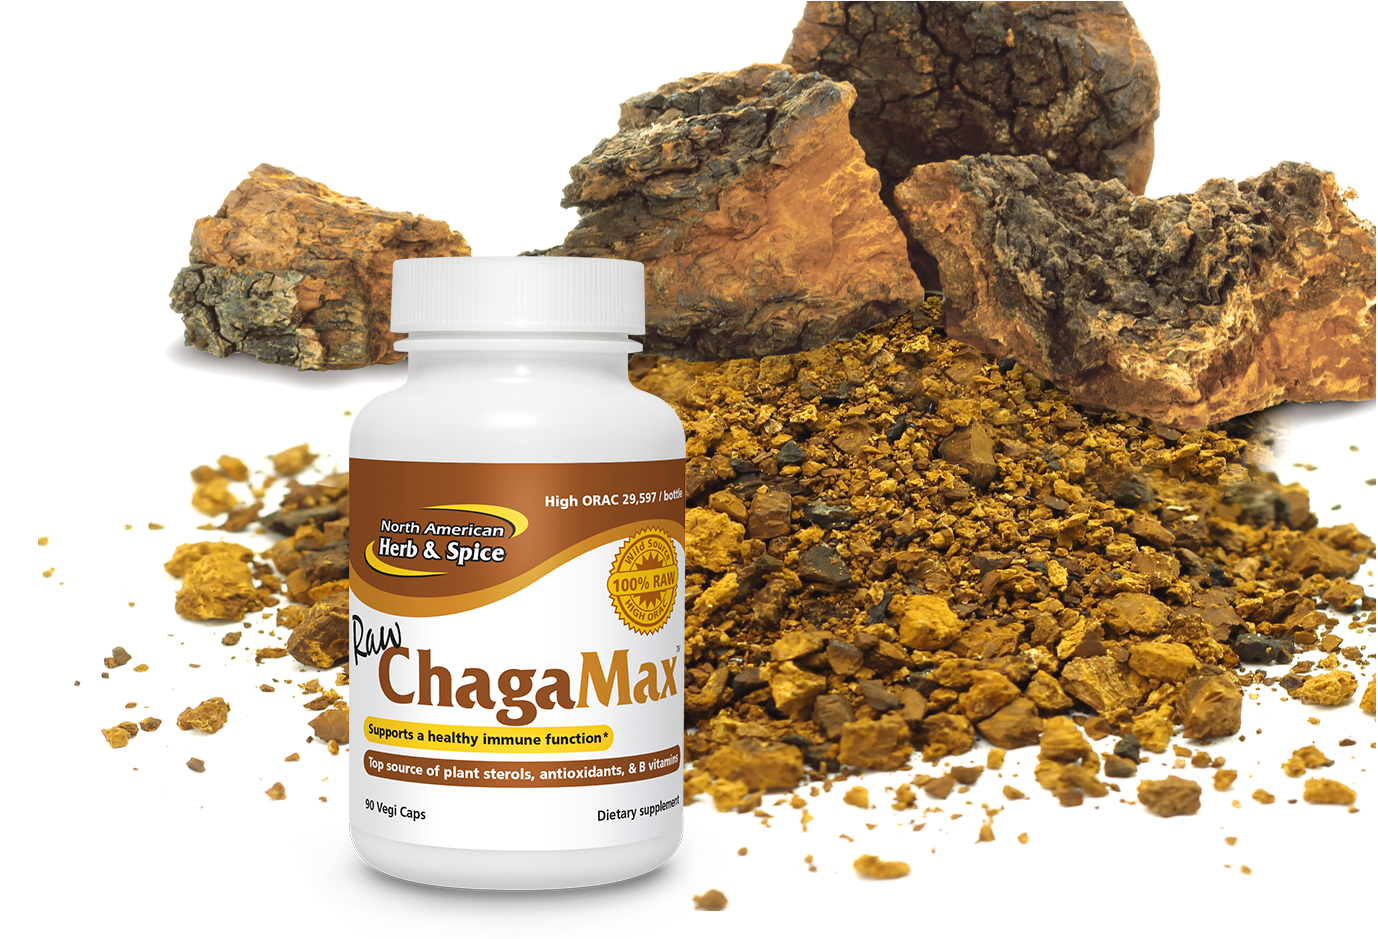 Raw chaga with ChagaMax product bottle